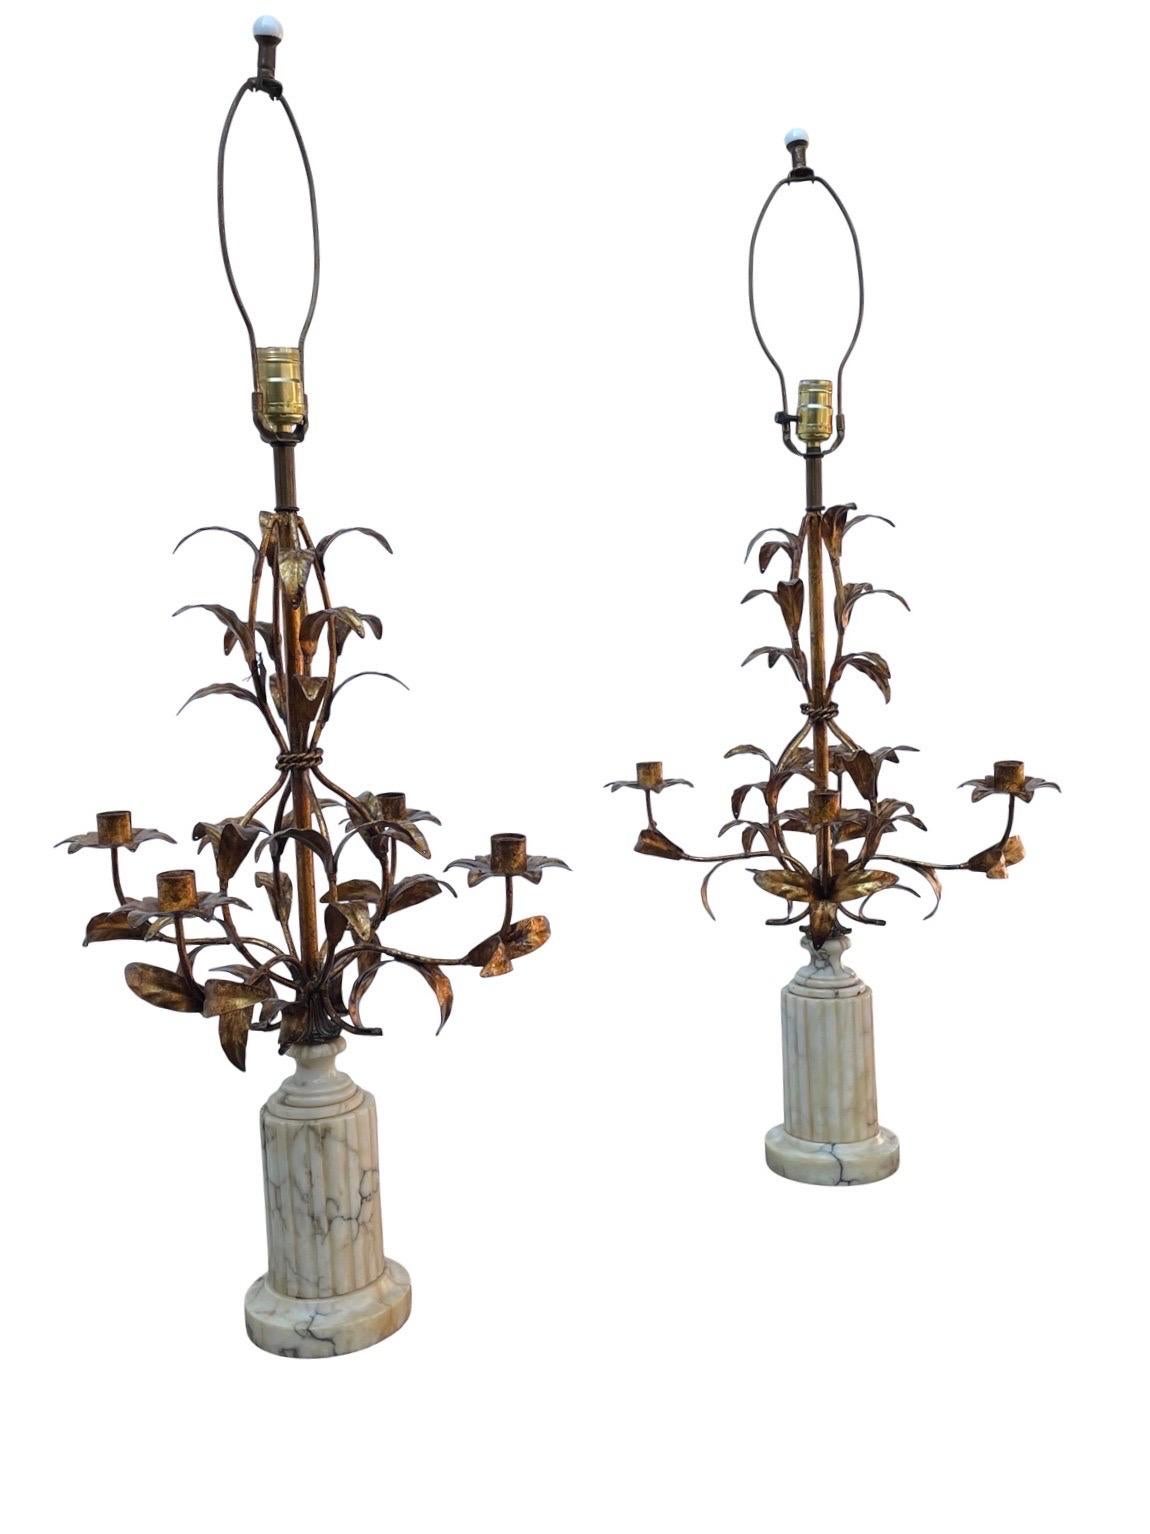 Mid-20th Century Vintage Regency Italian Gold Gilt & Marble Candelabra Table Lamps For Sale